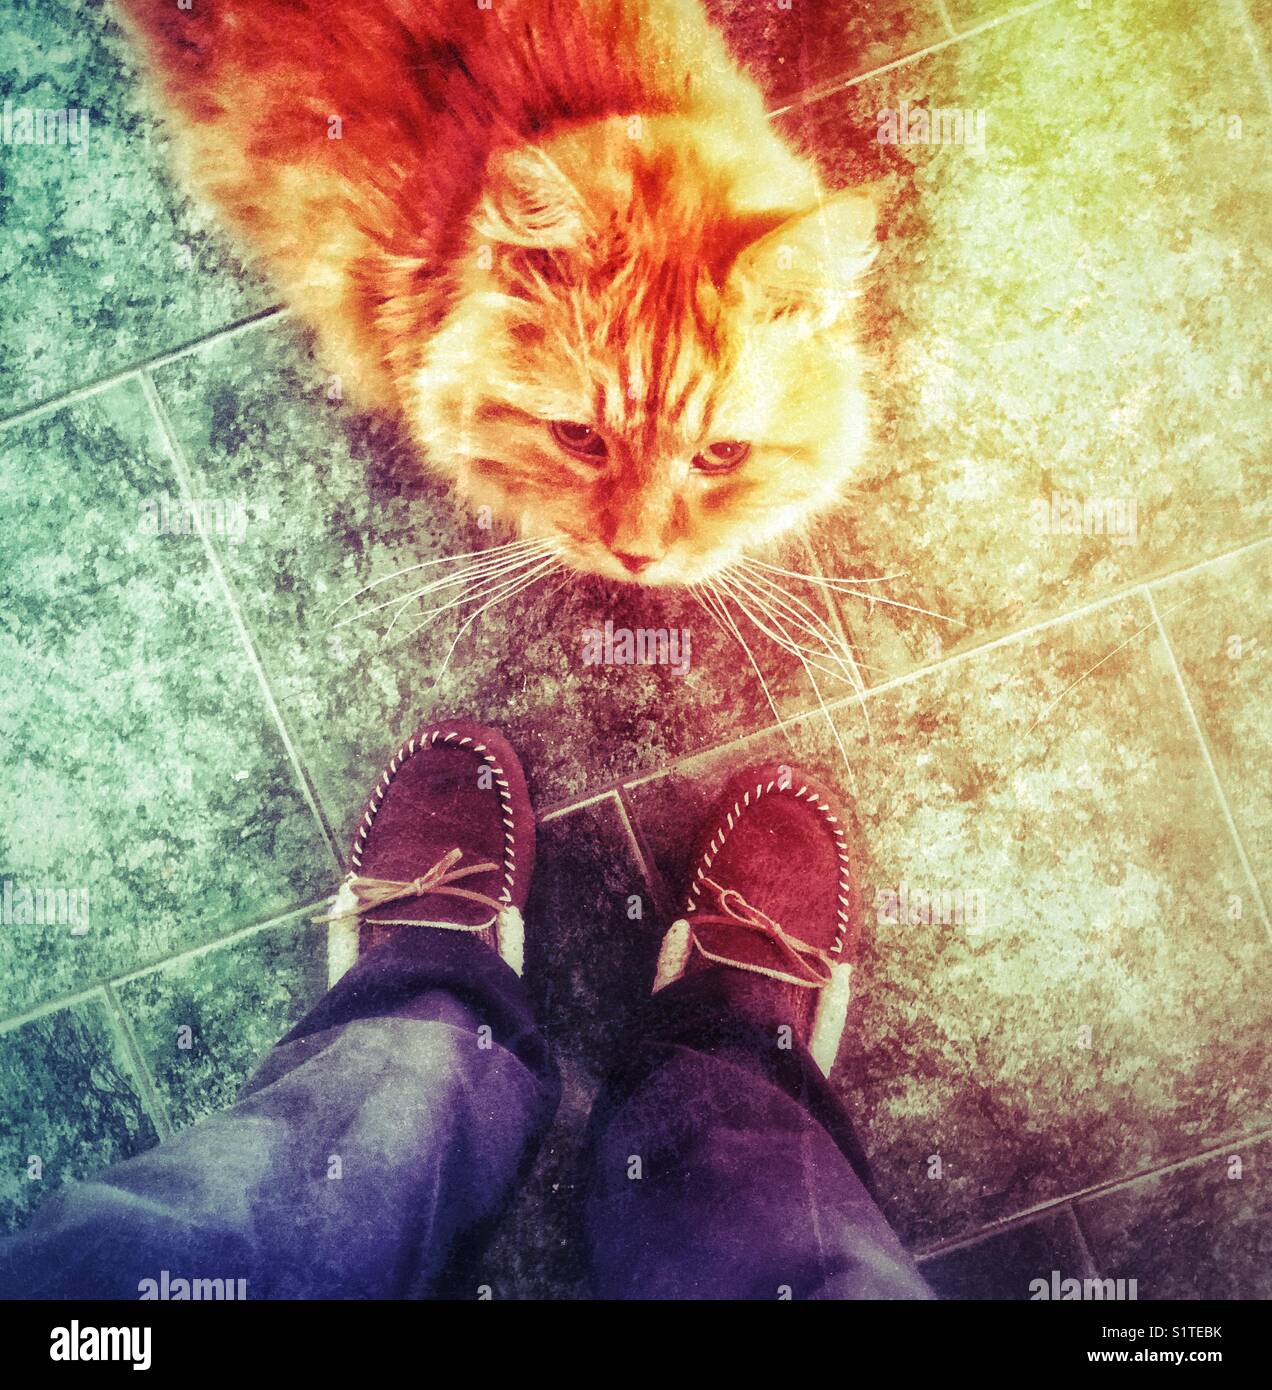 Orange tabby cat at person’s feet looking up from person perspective with slippered feet in view Stock Photo